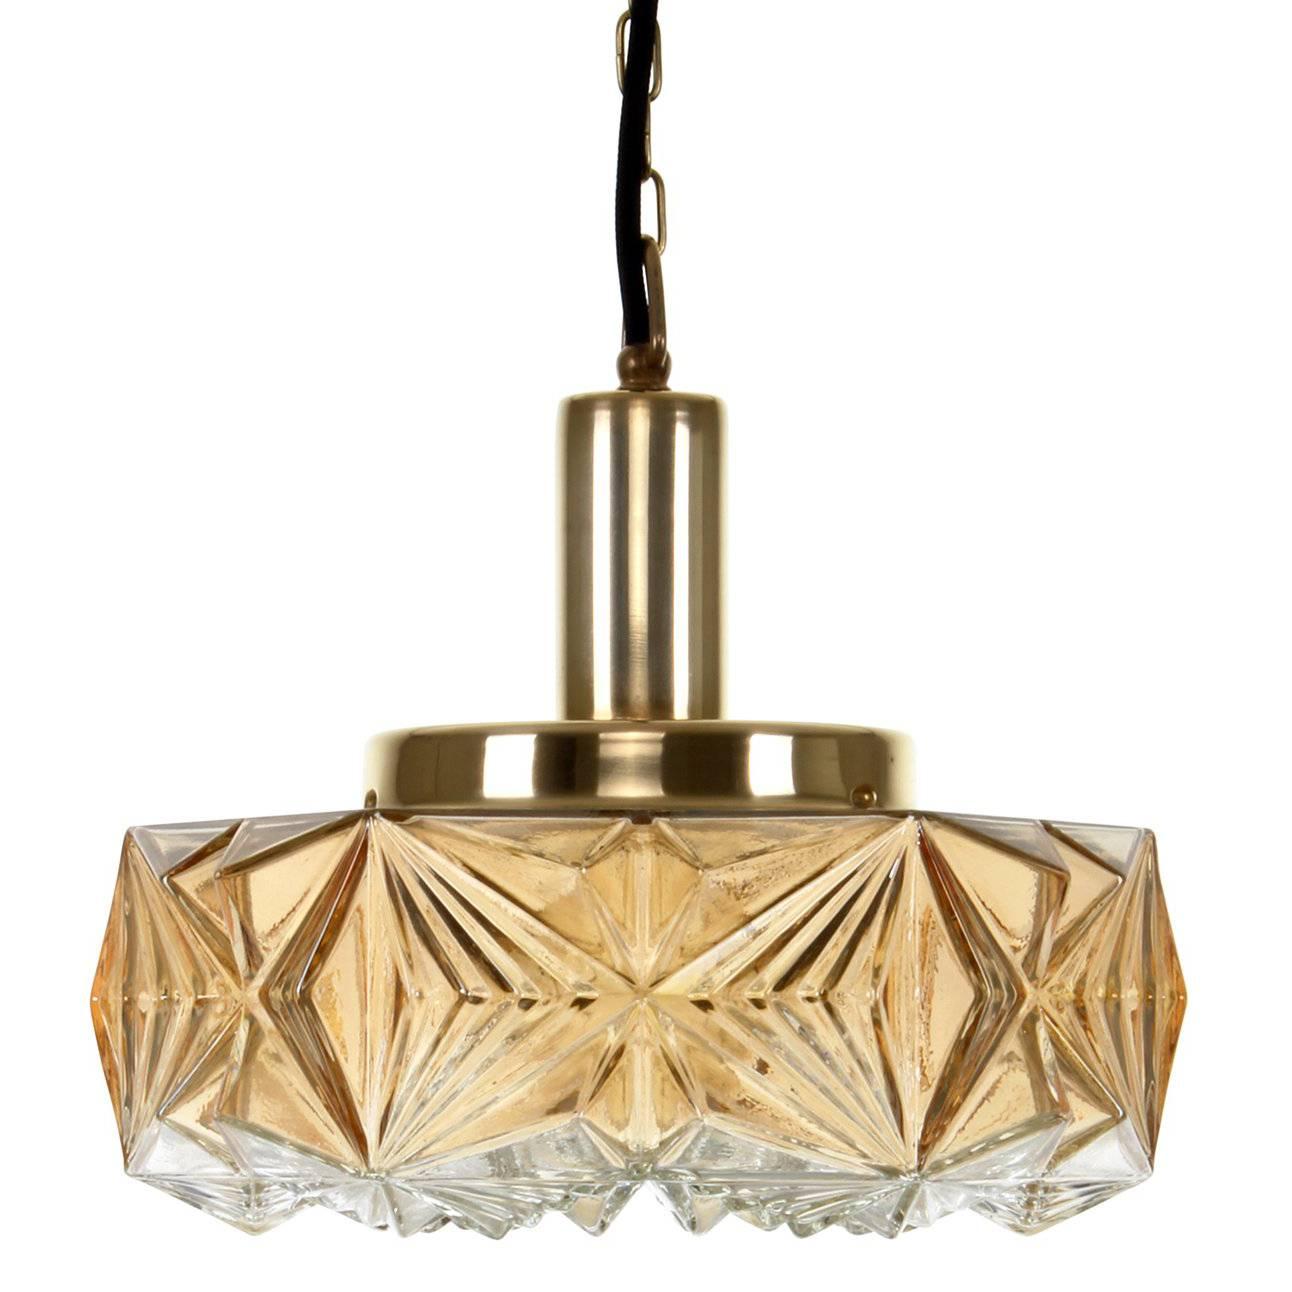 Pressed Glass Pendant, No. 36404 by Vitrika, 1960s, Vintage Glass and Brass Lamp